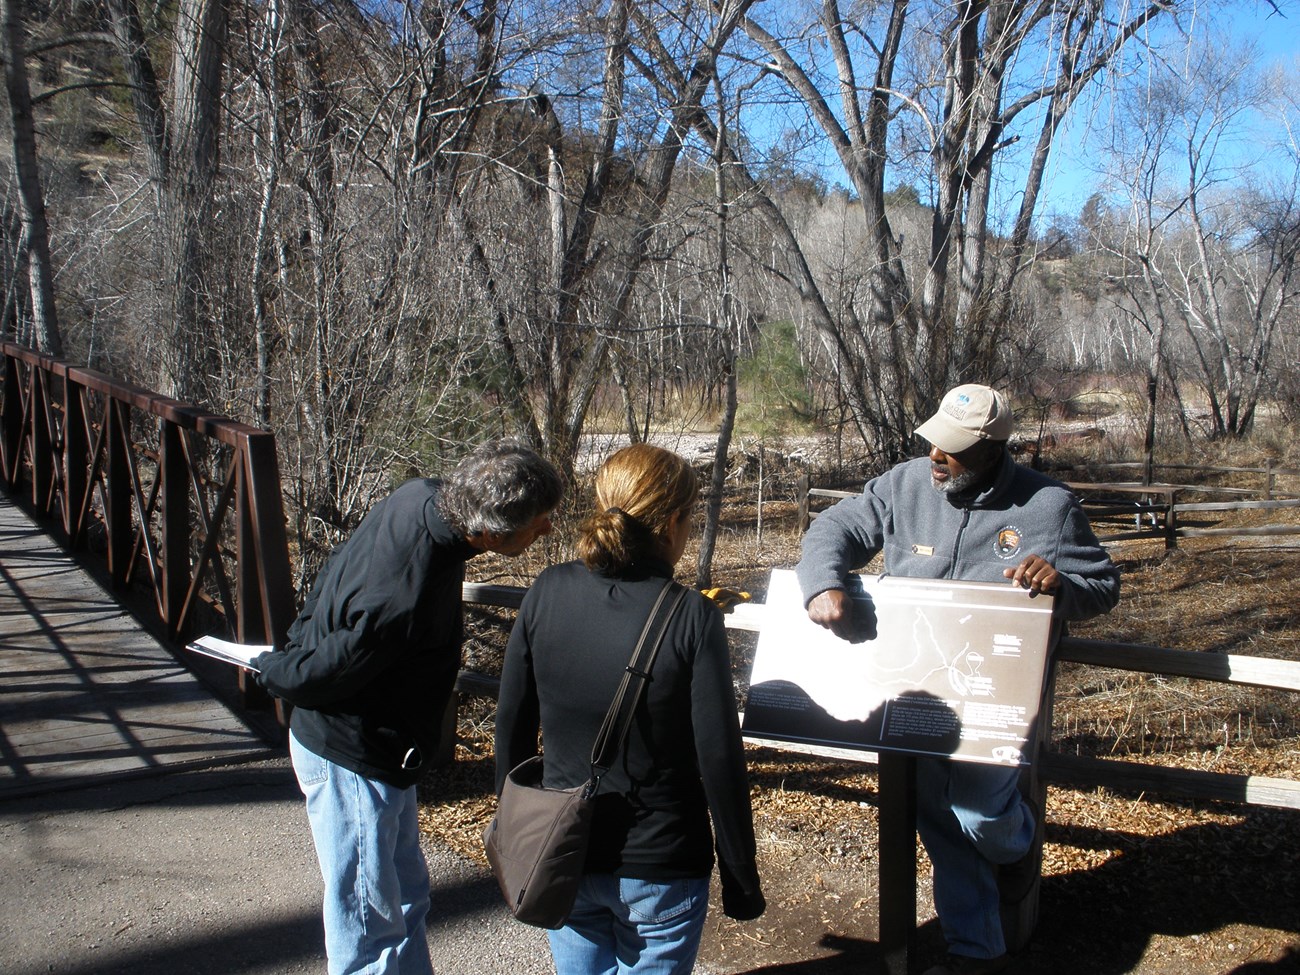 A volunteer ranger orients visitors to the trail conditions at Cliff Dweller Canyon trailhead.